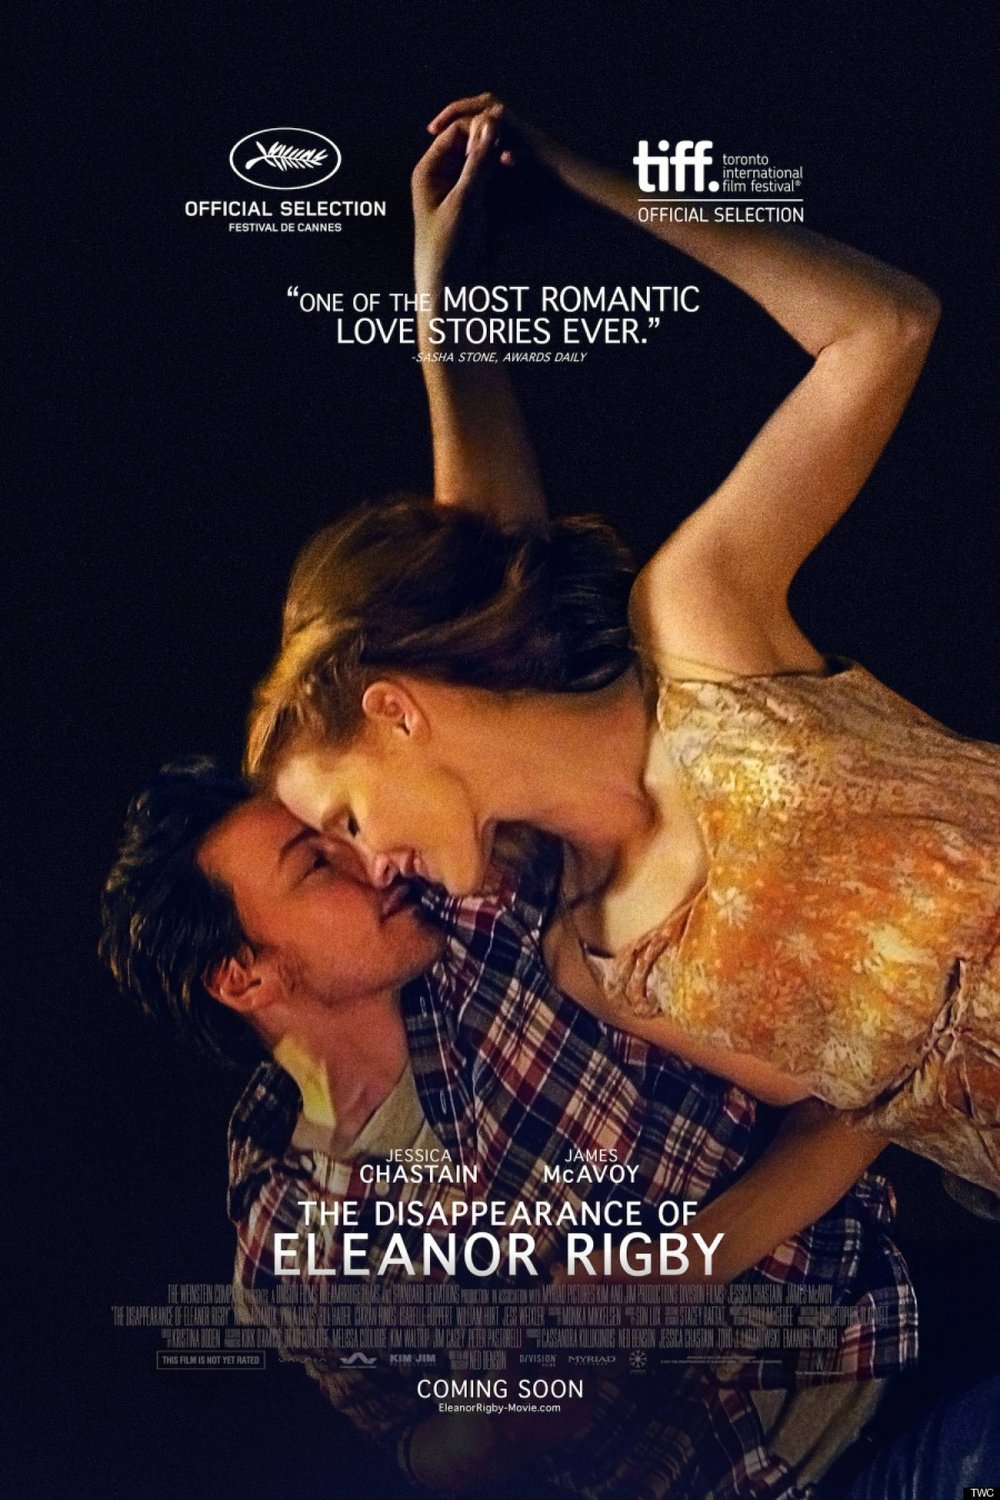 L'affiche du film The Disappearance of Eleanor Rigby: Him